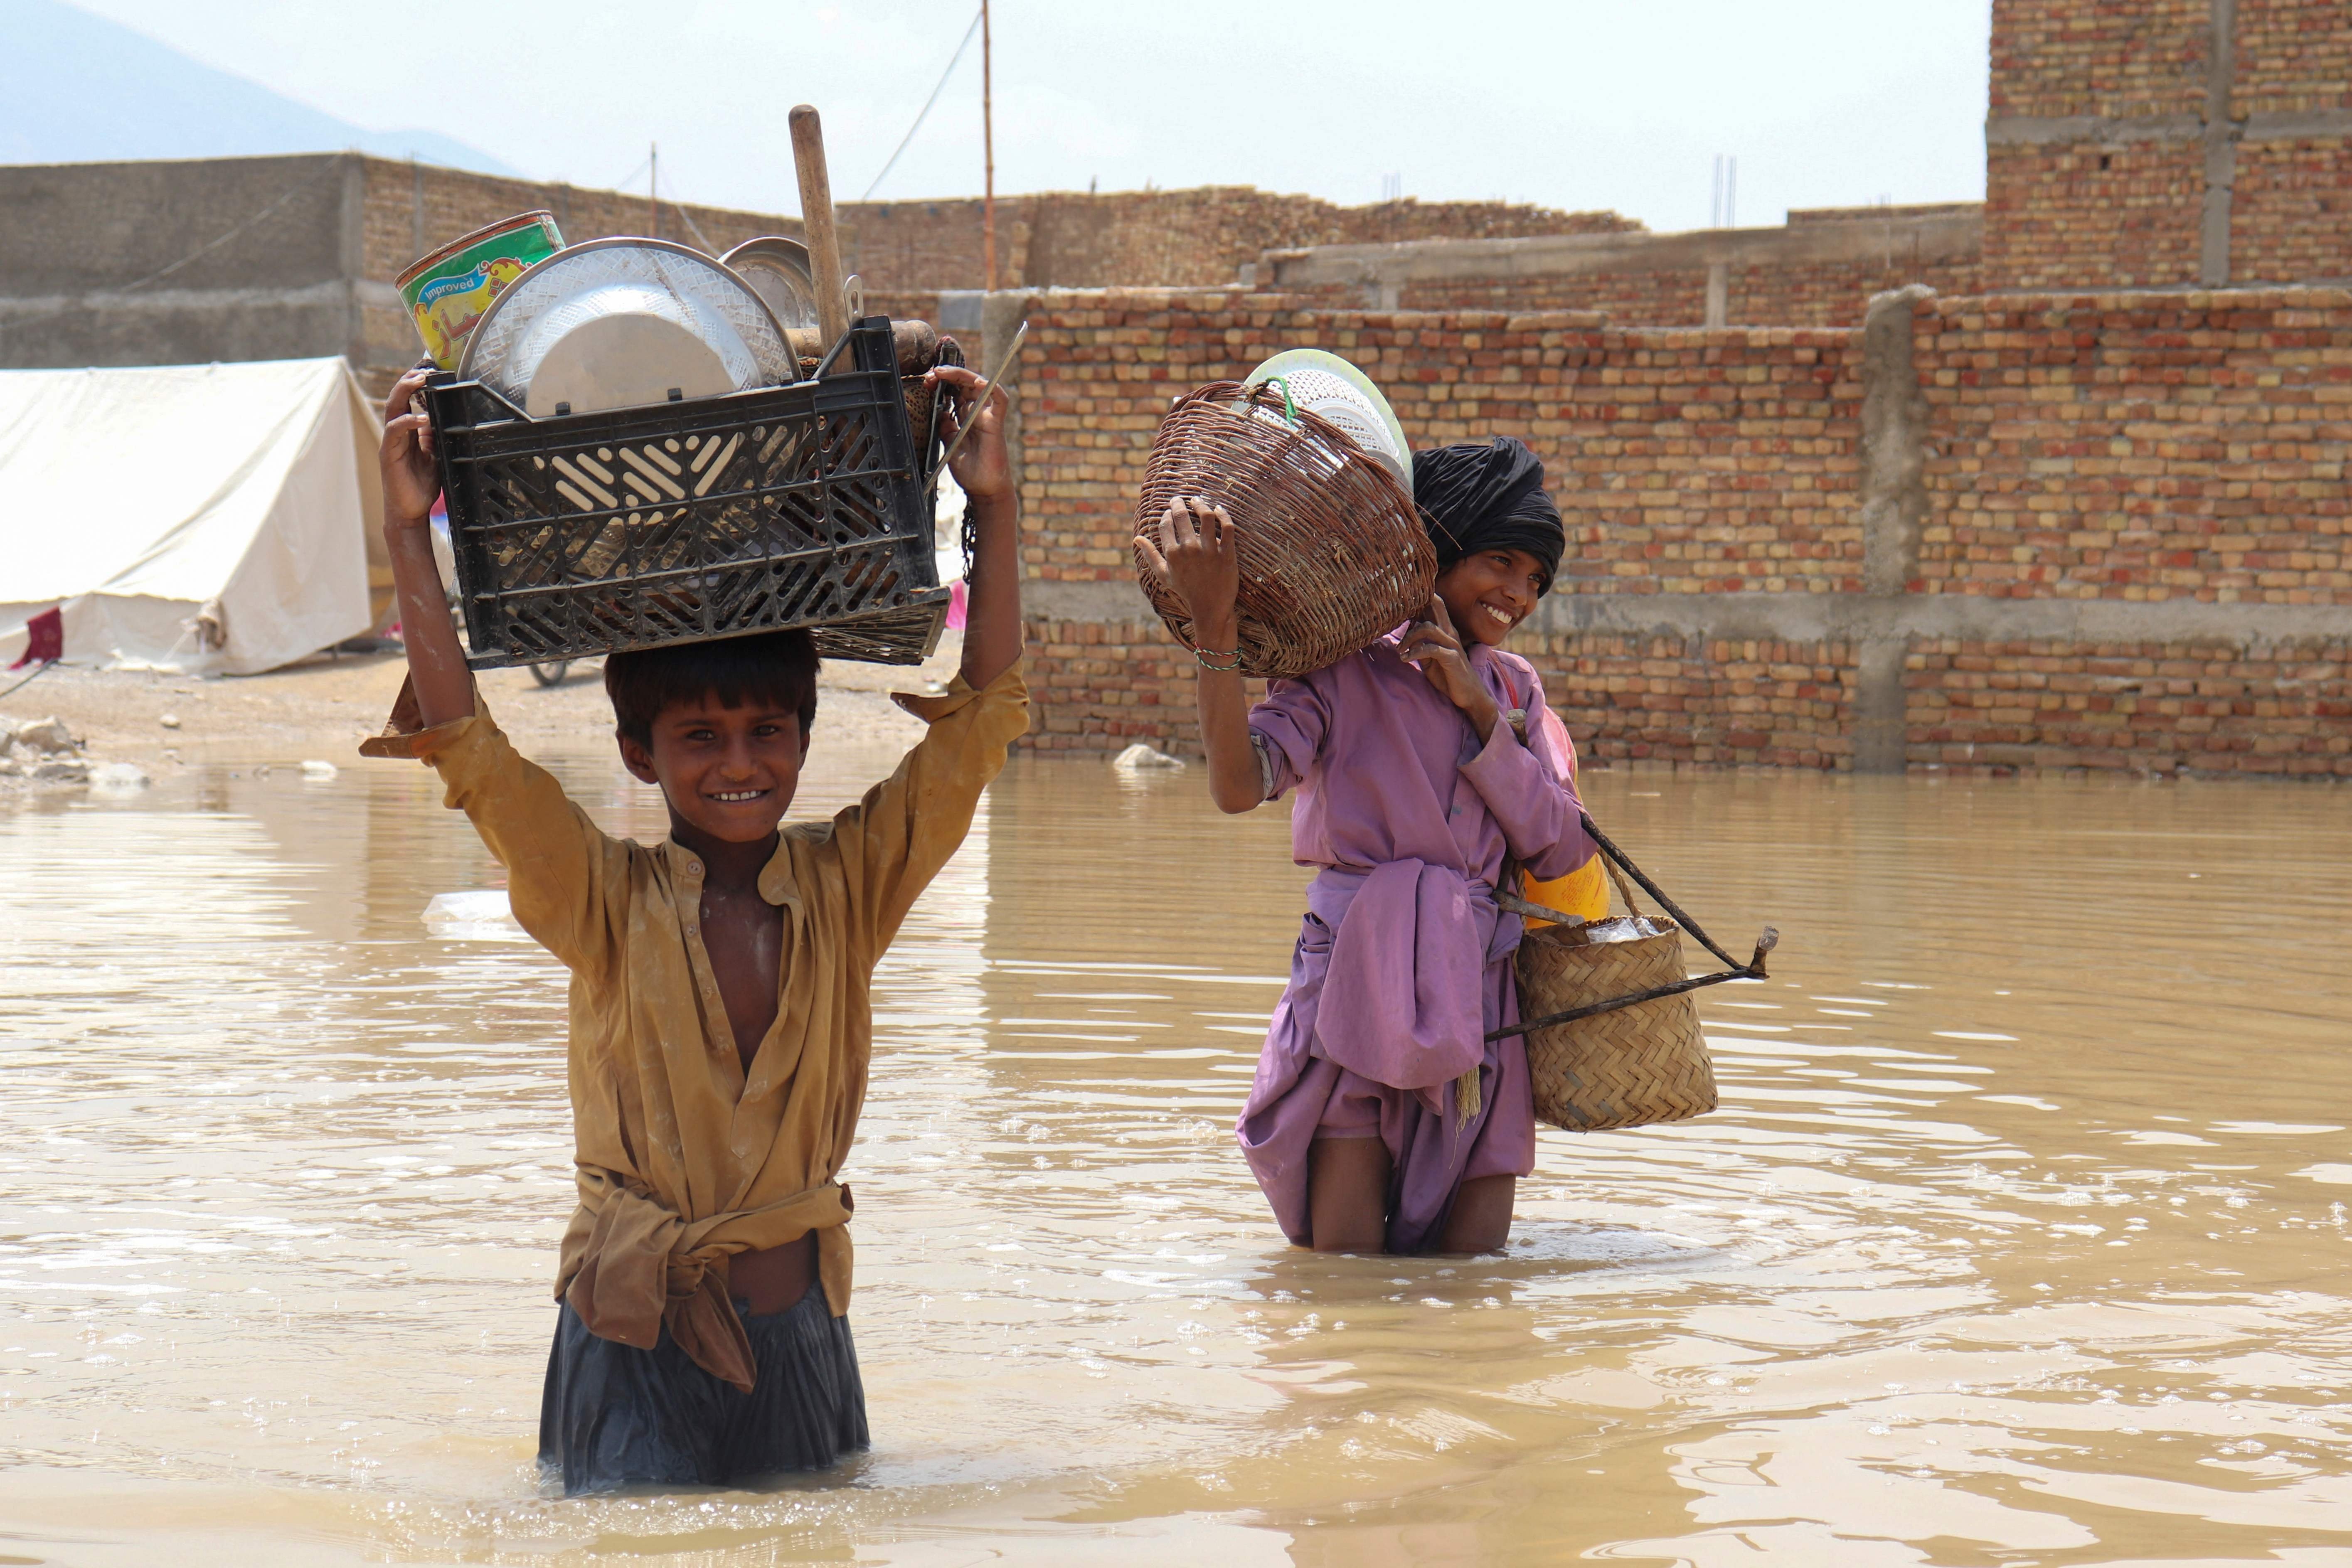 Children carrying household items wade through a flooded area after a monsoon rainfall in Quetta, Pakistan, July 5, 2022. (Photo by Banaras KHAN / AFP)